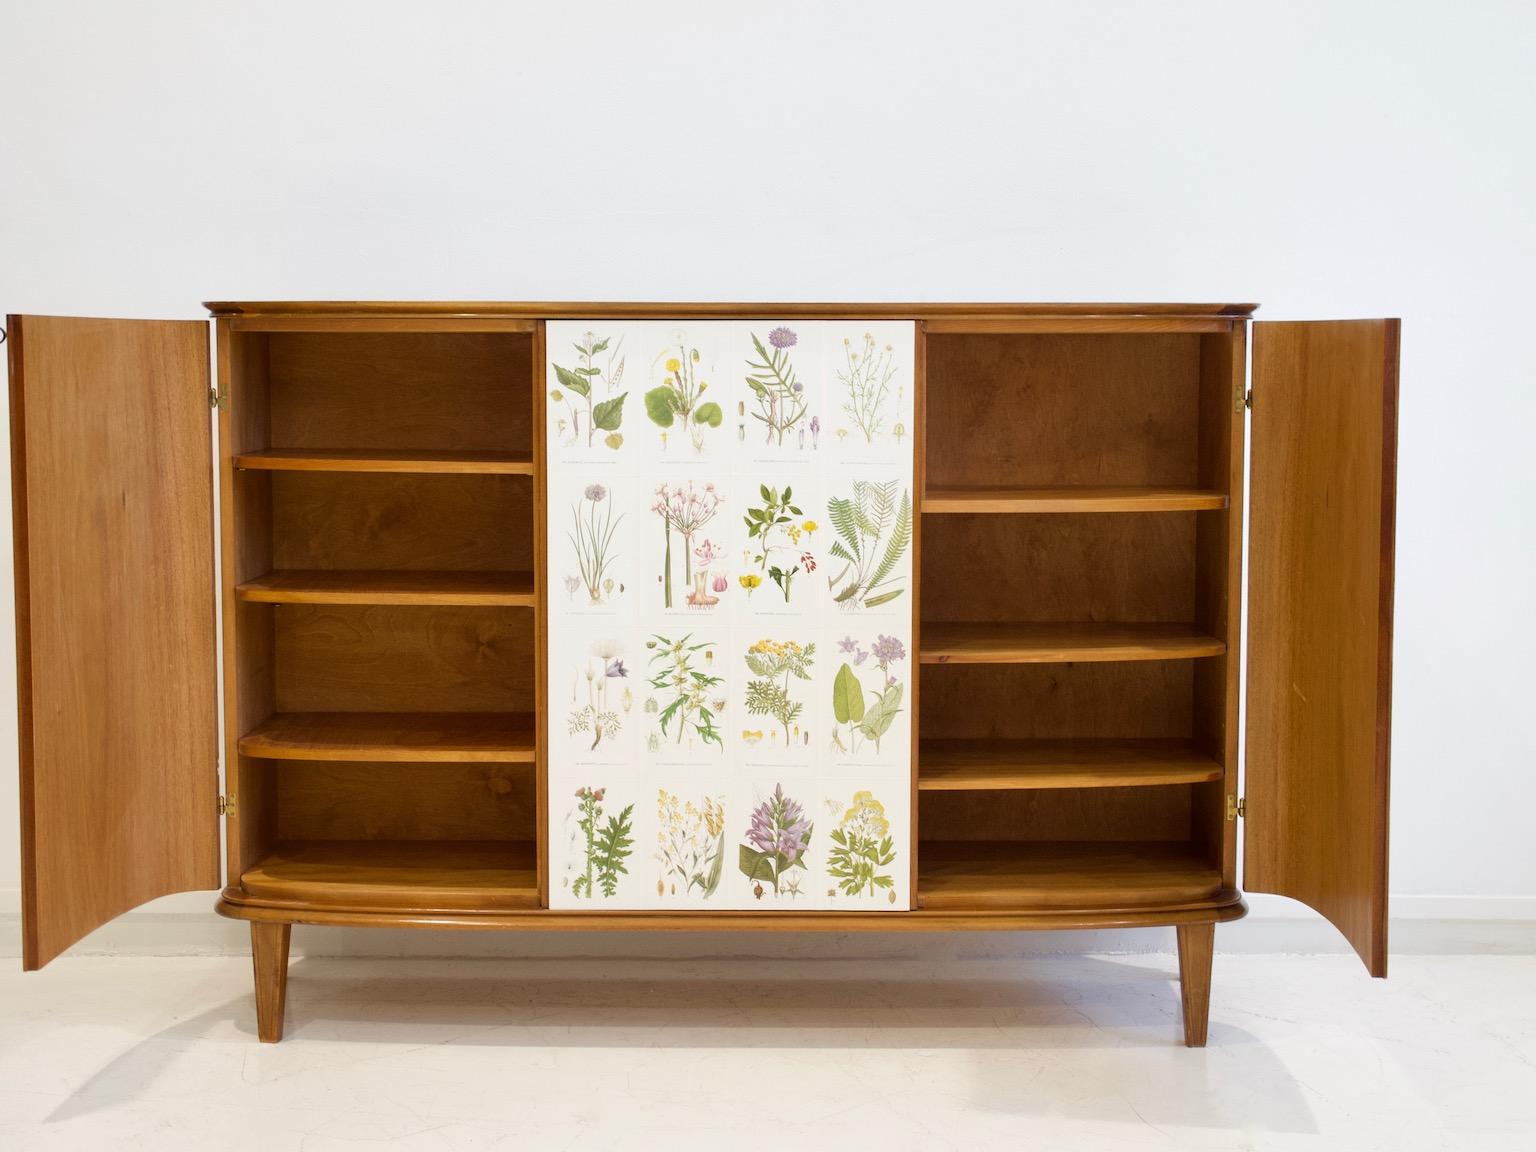 Wooden cabinet decorated with illustrations from the book 